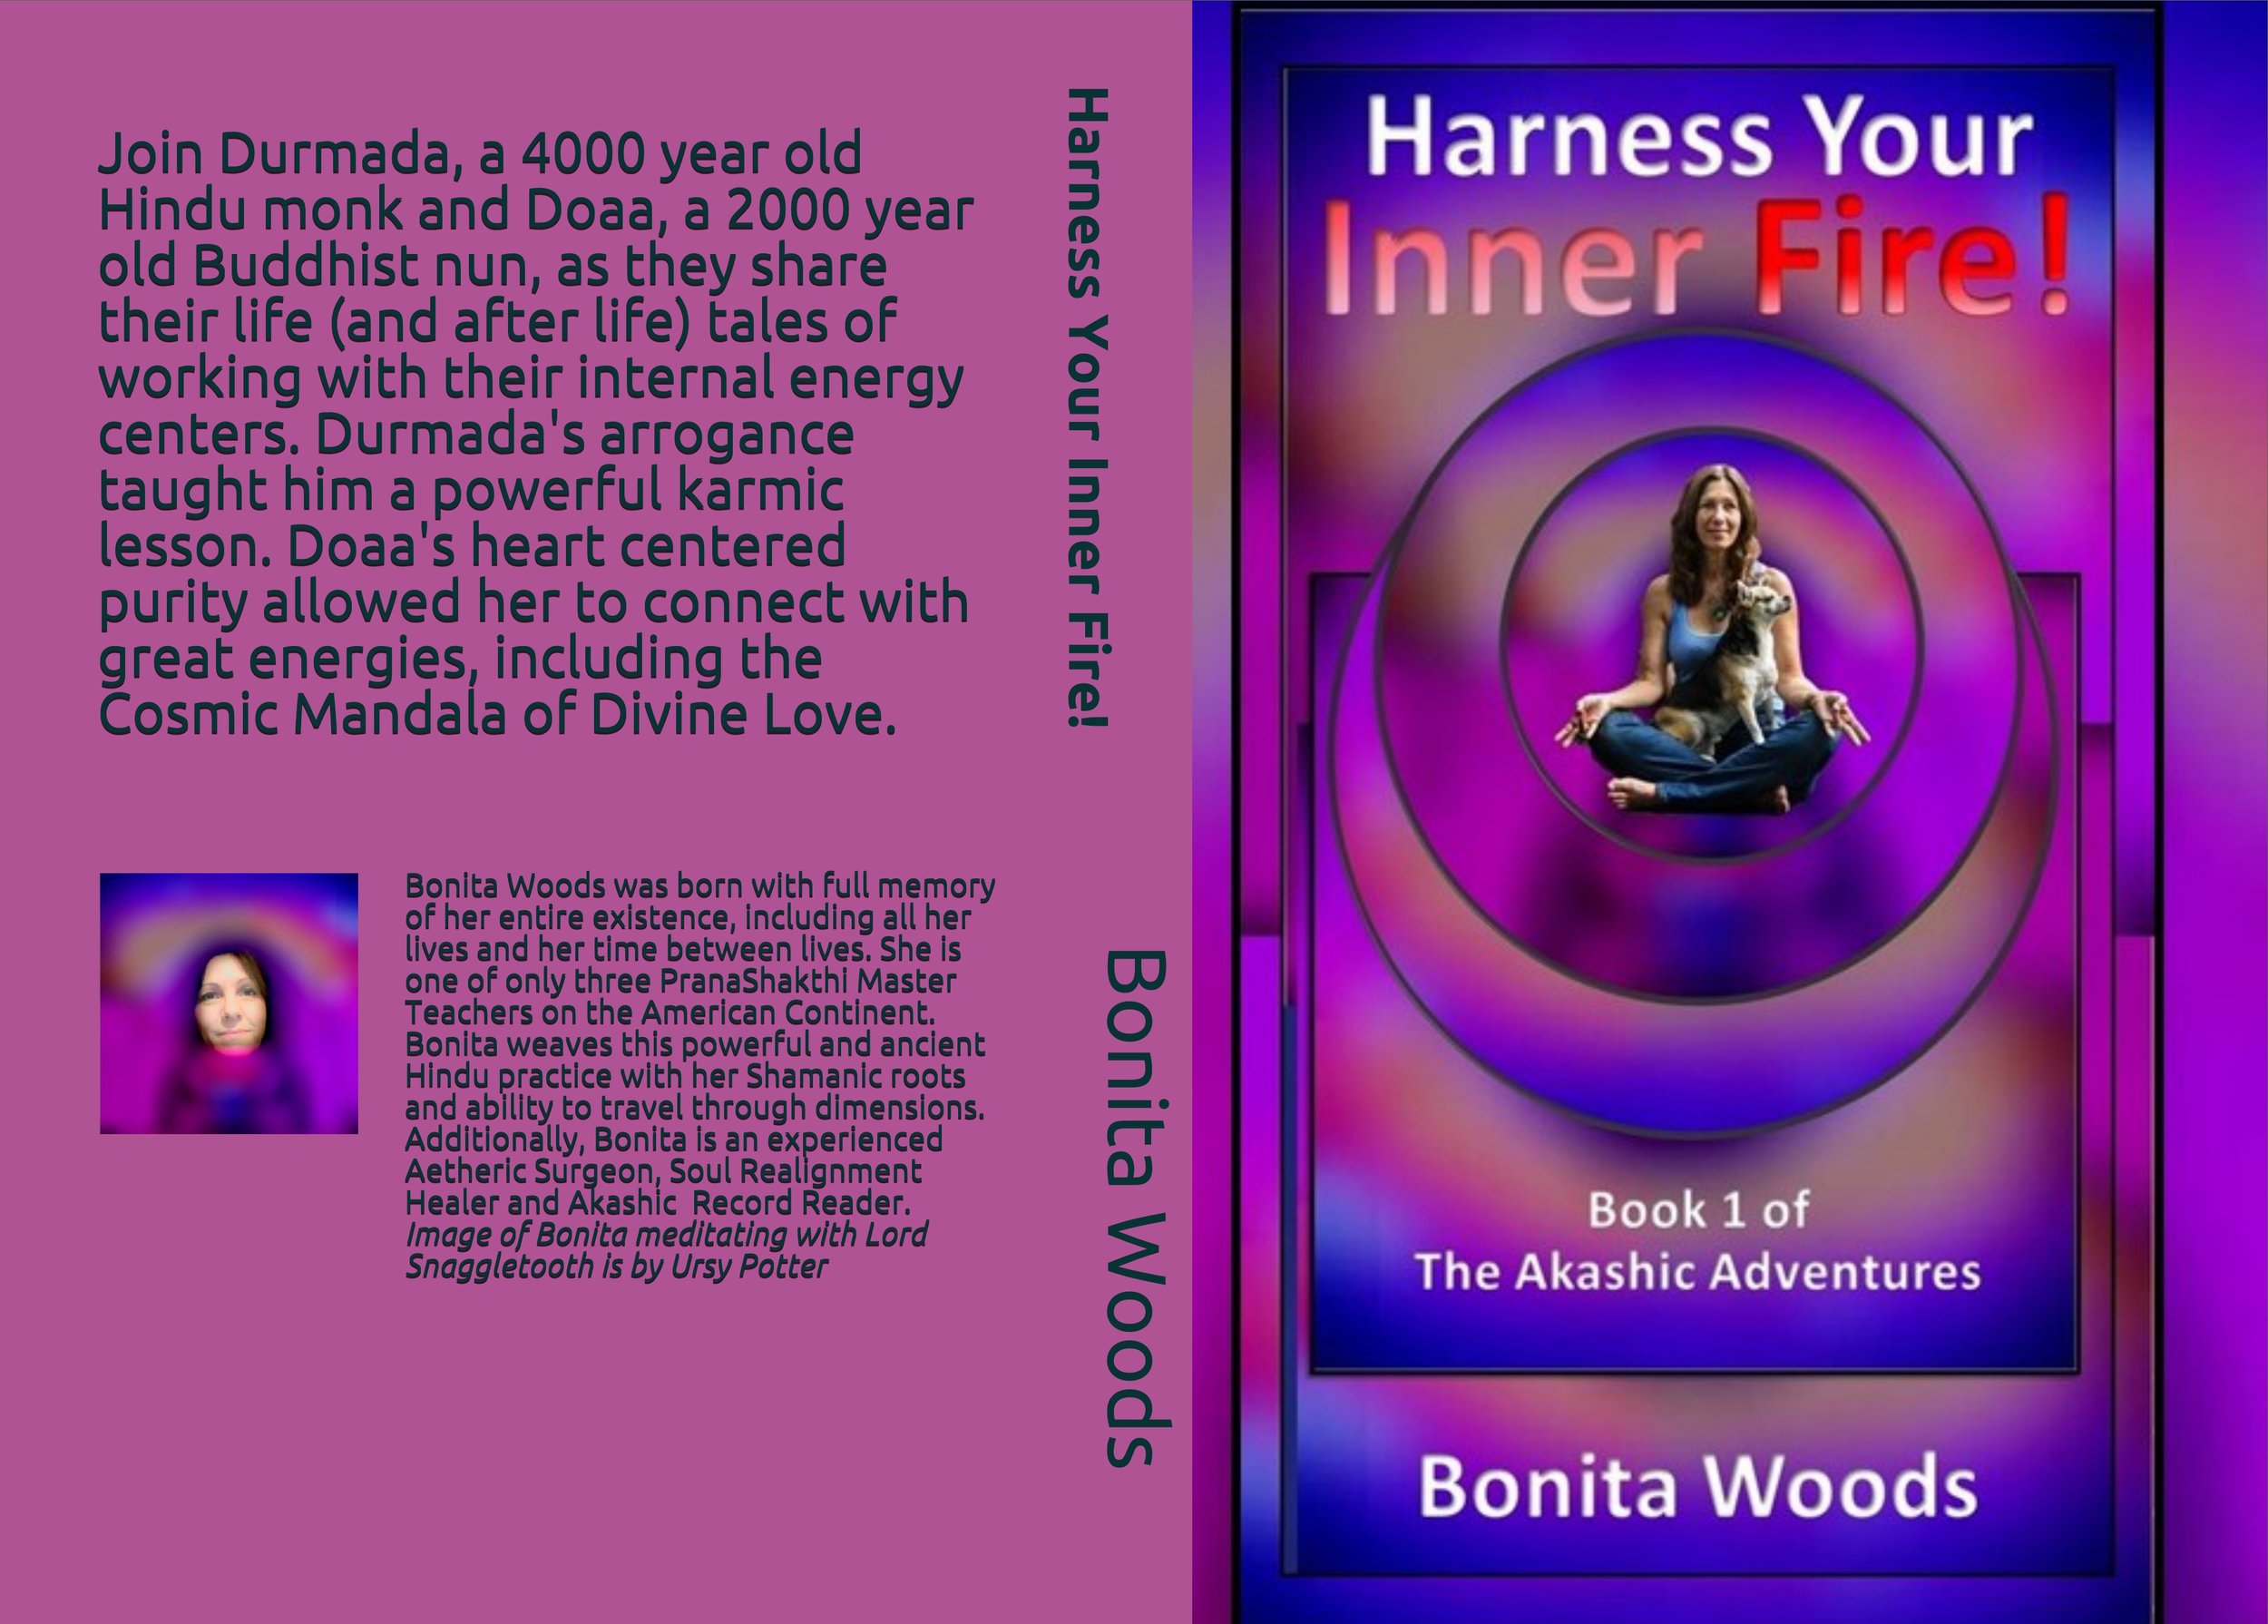 Harness Your Inner Fire! book cover final.jpg